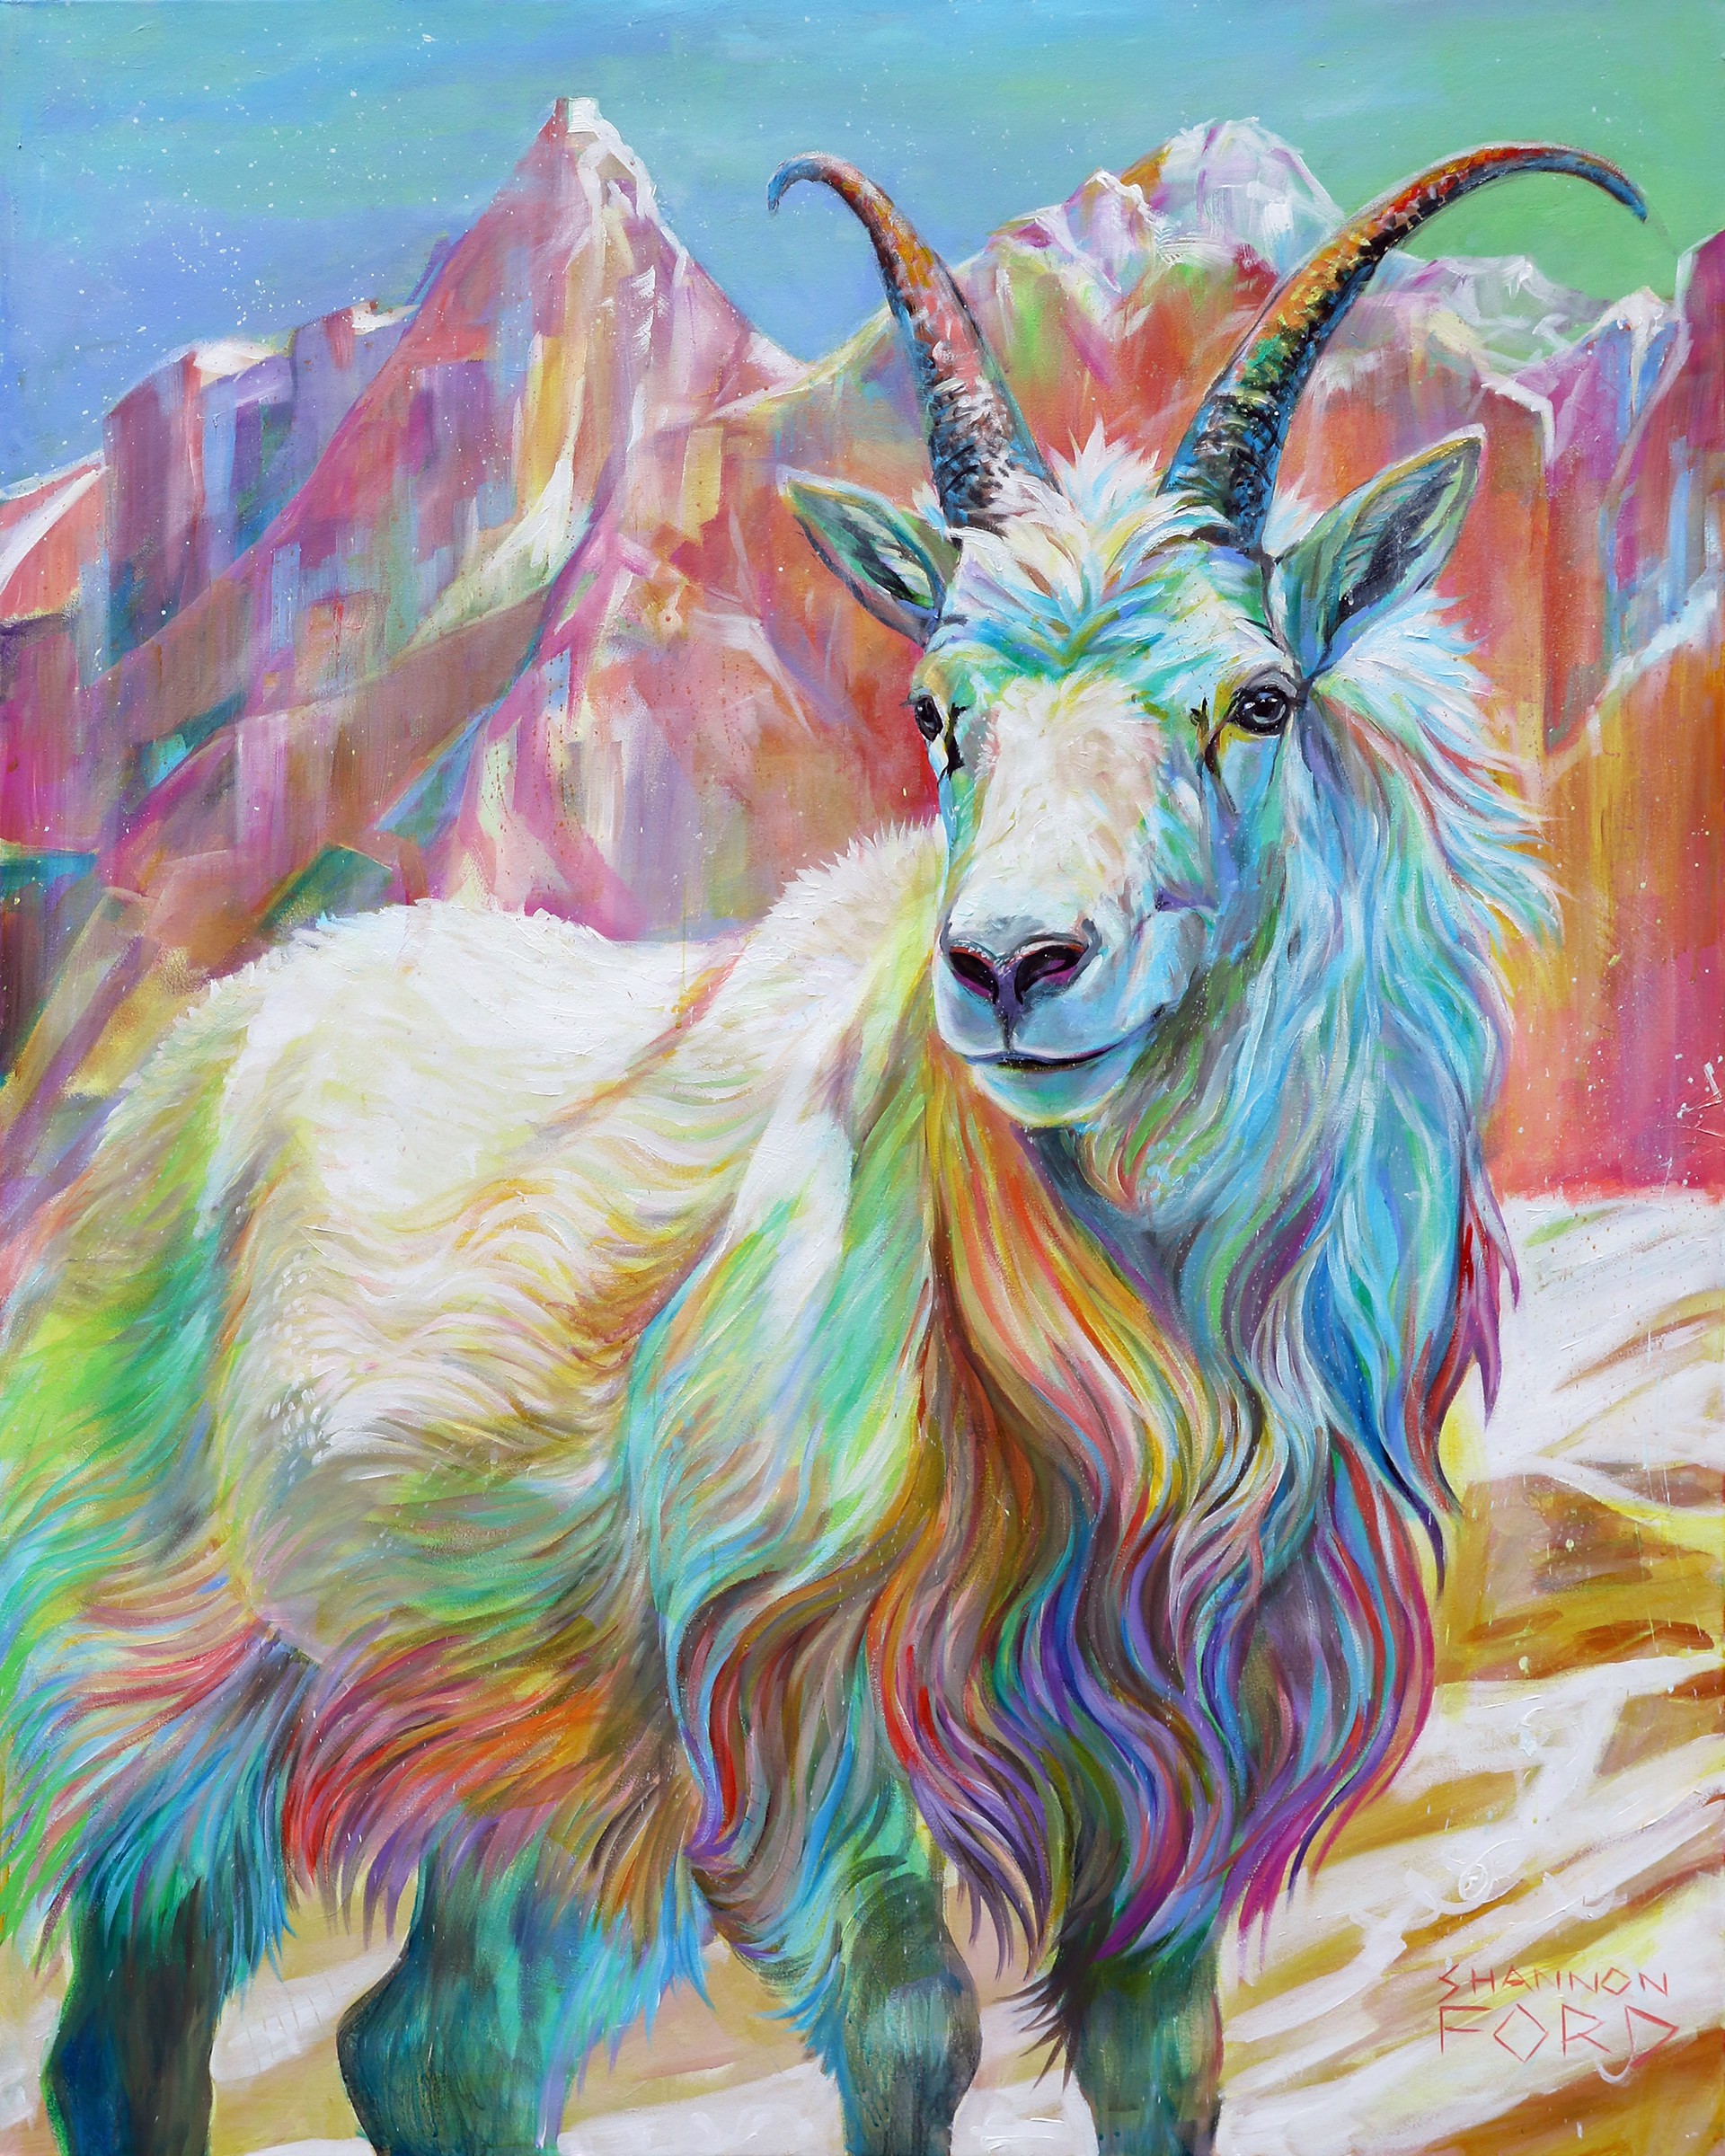 Mountain Goat Dreamscape by Shannon Ford